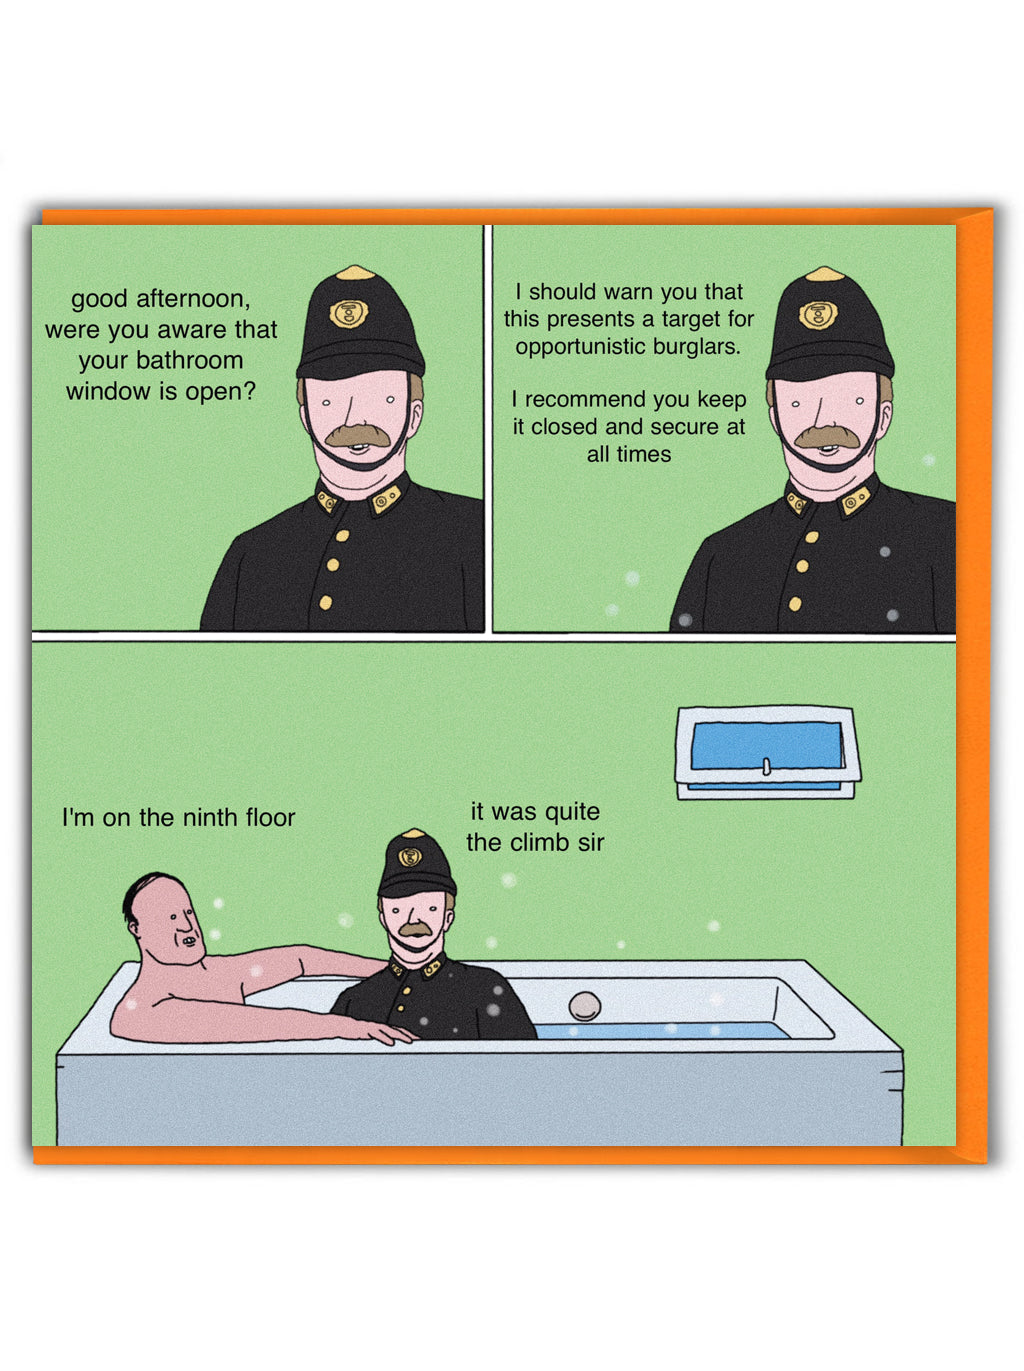 A greetings card broken into a comic strip where an old-style British Policeman gets into the bath with a white man after having climbed through the window.